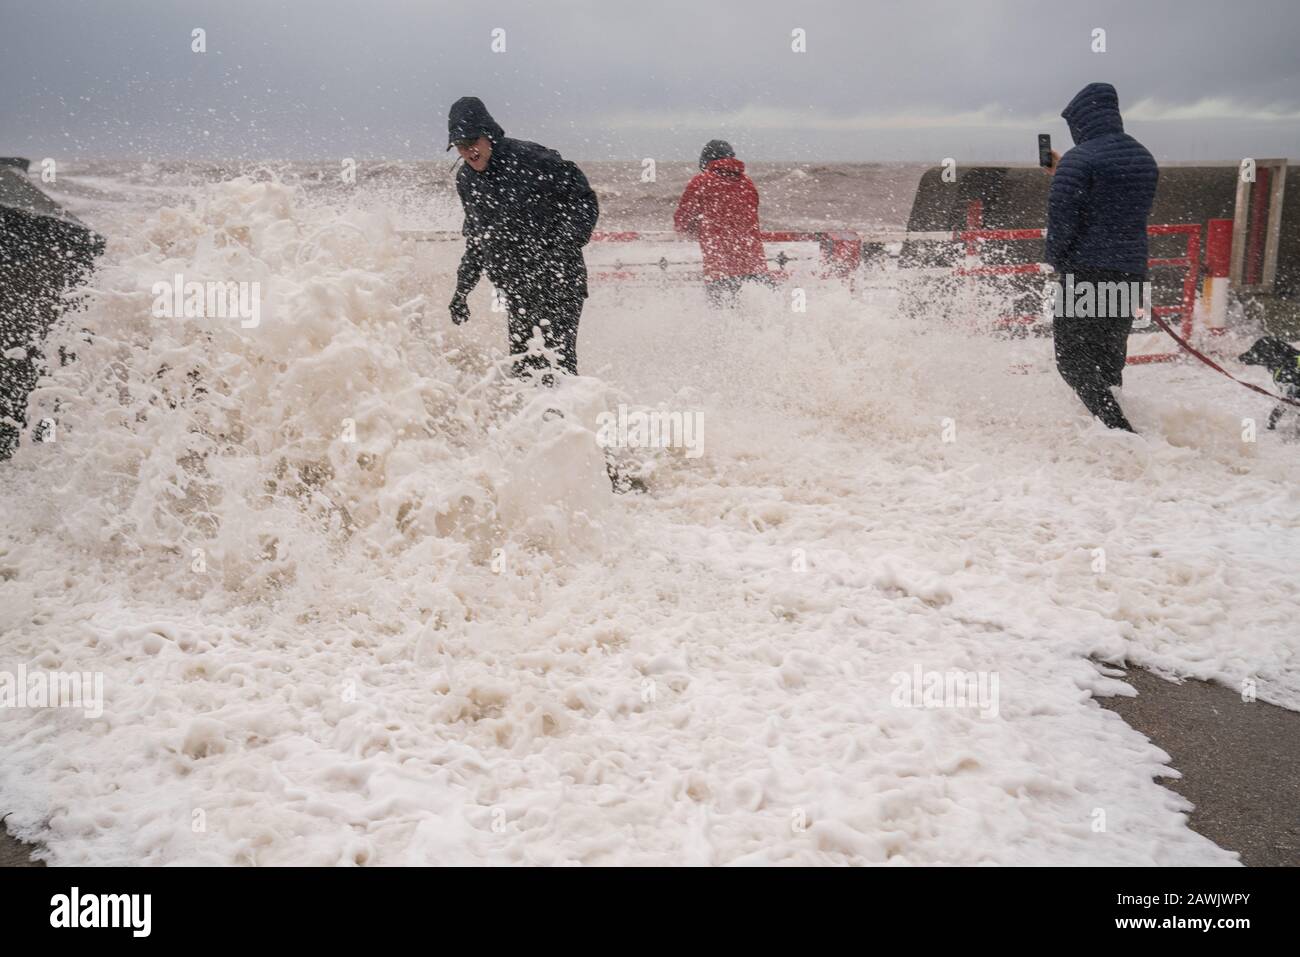 New Brighton, Wirral. 9th Feb, 2020. People are soaked by waves crashing into the promenade at New Brighton on the Wirral caused by Storm Ciara. Credit: Christopher Middleton/Alamy Live News Stock Photo